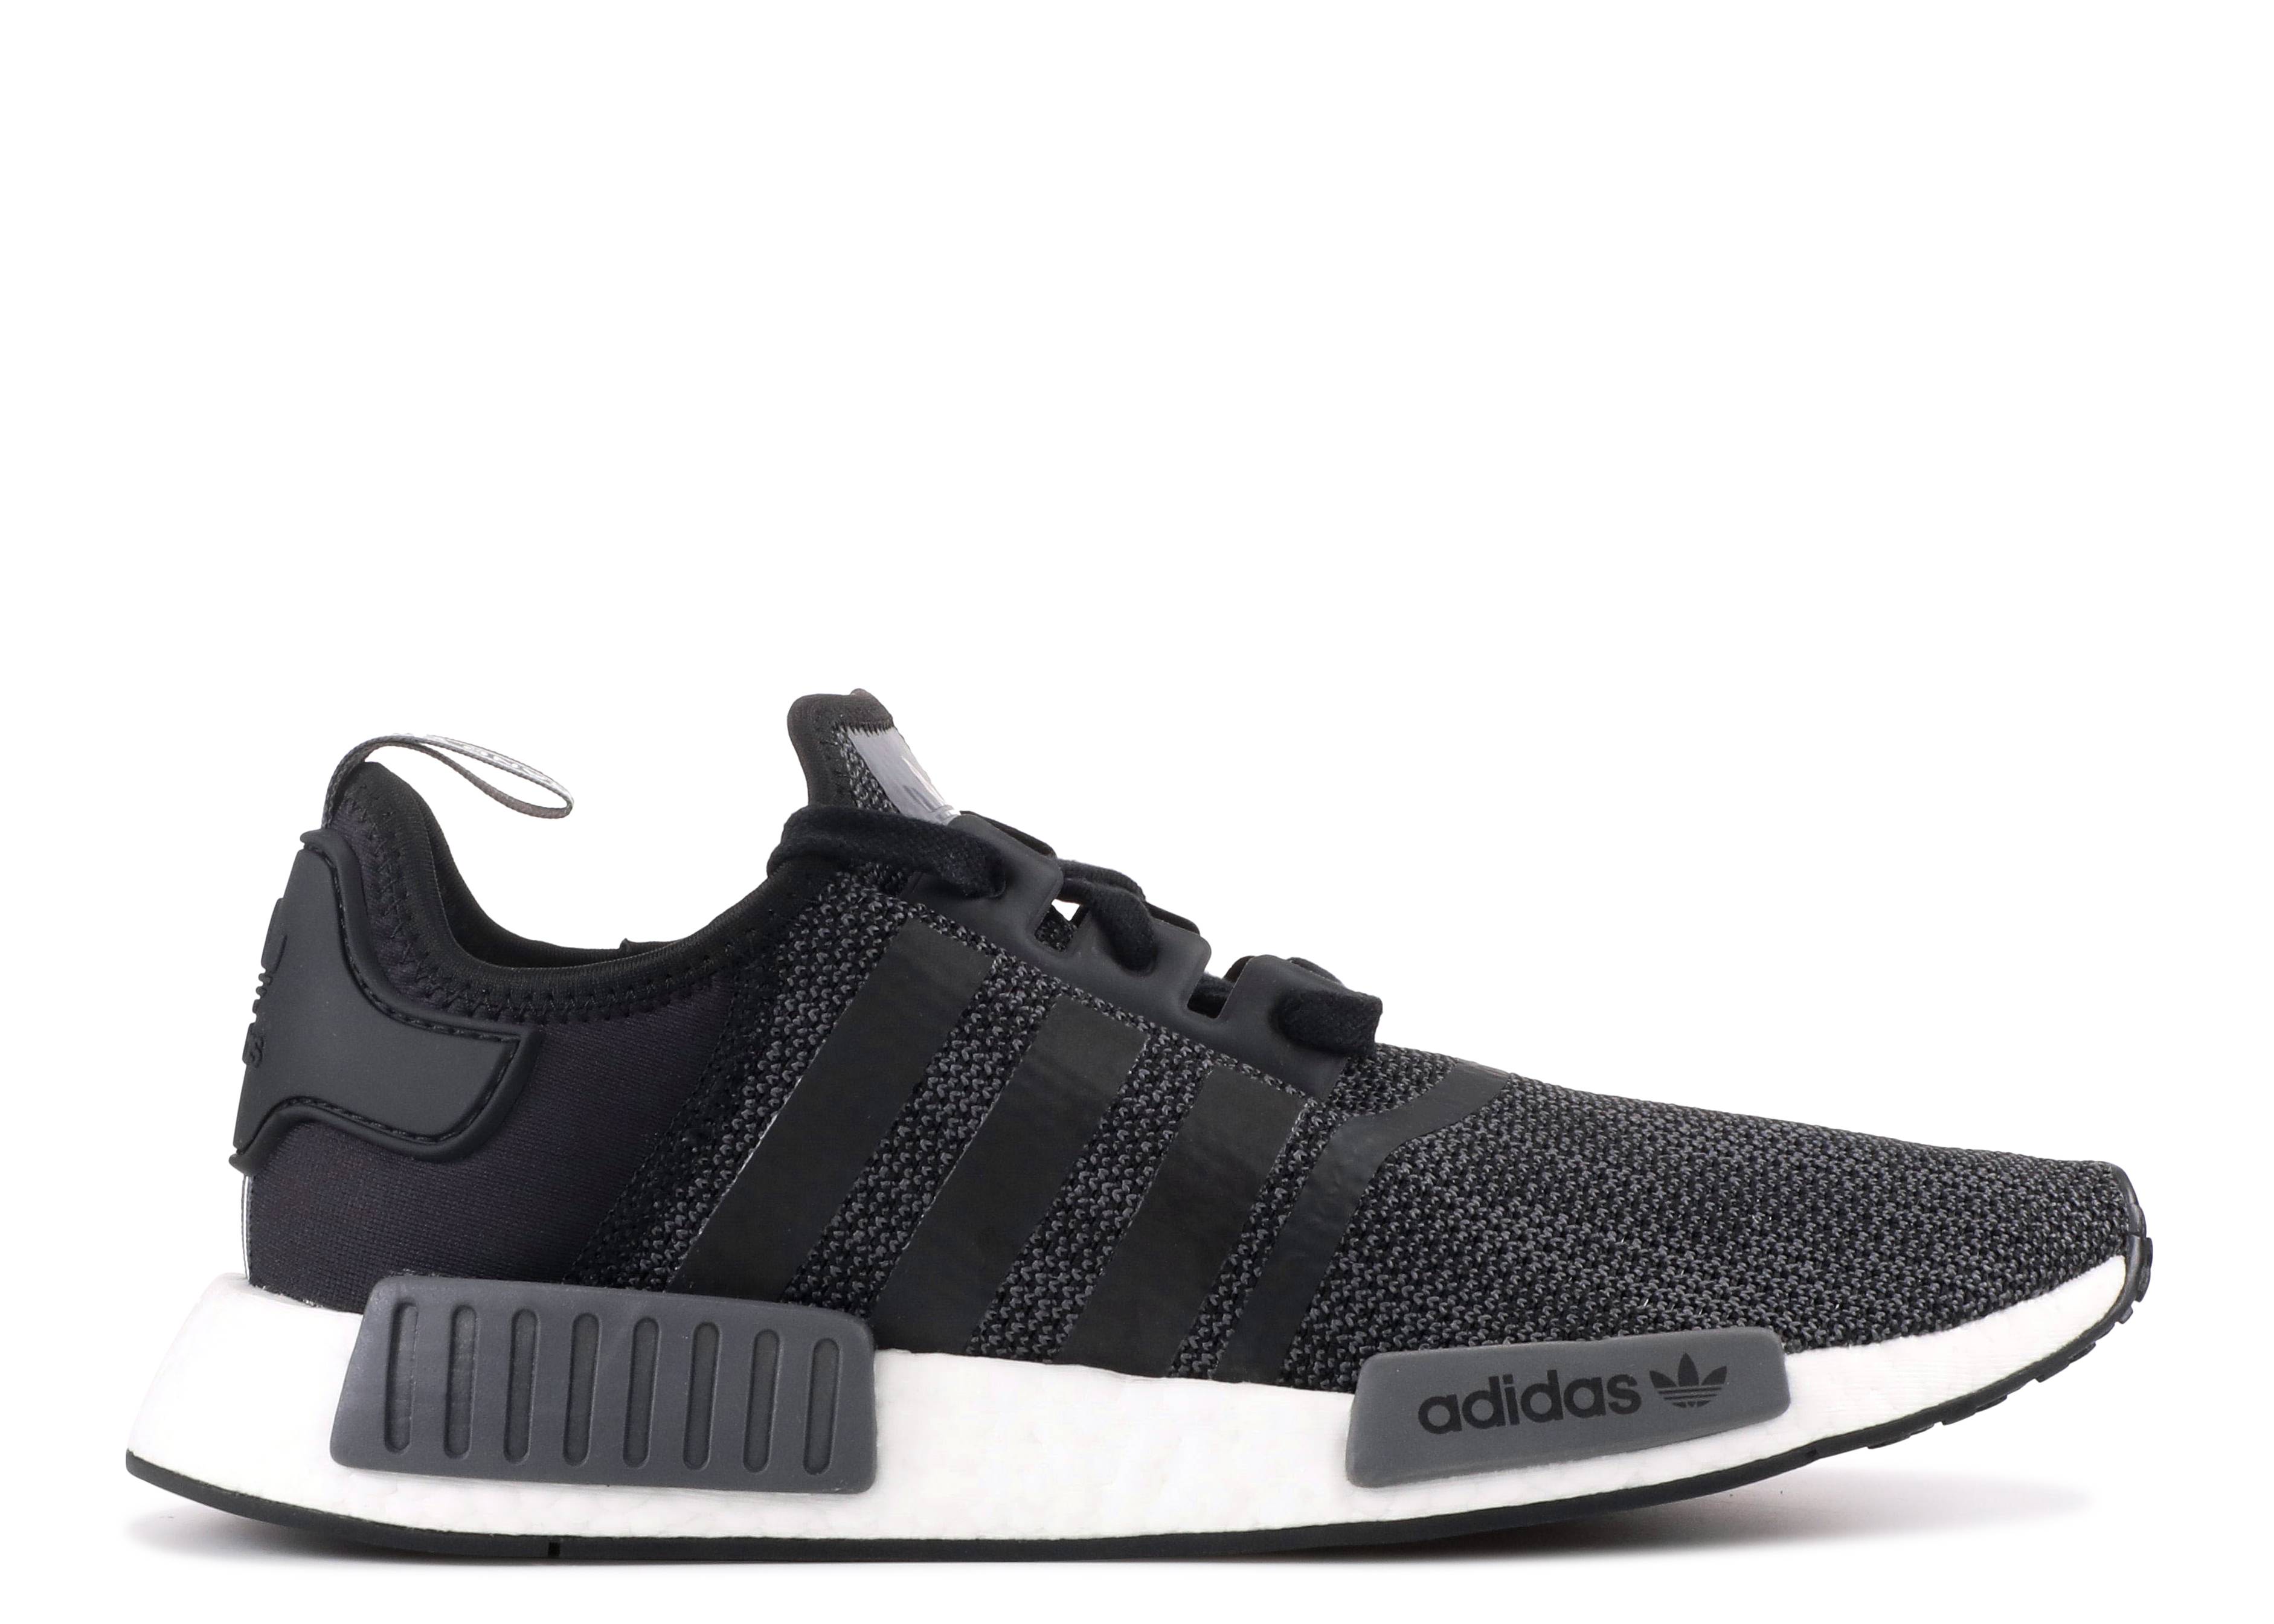 NMD_R1 'Carbon'